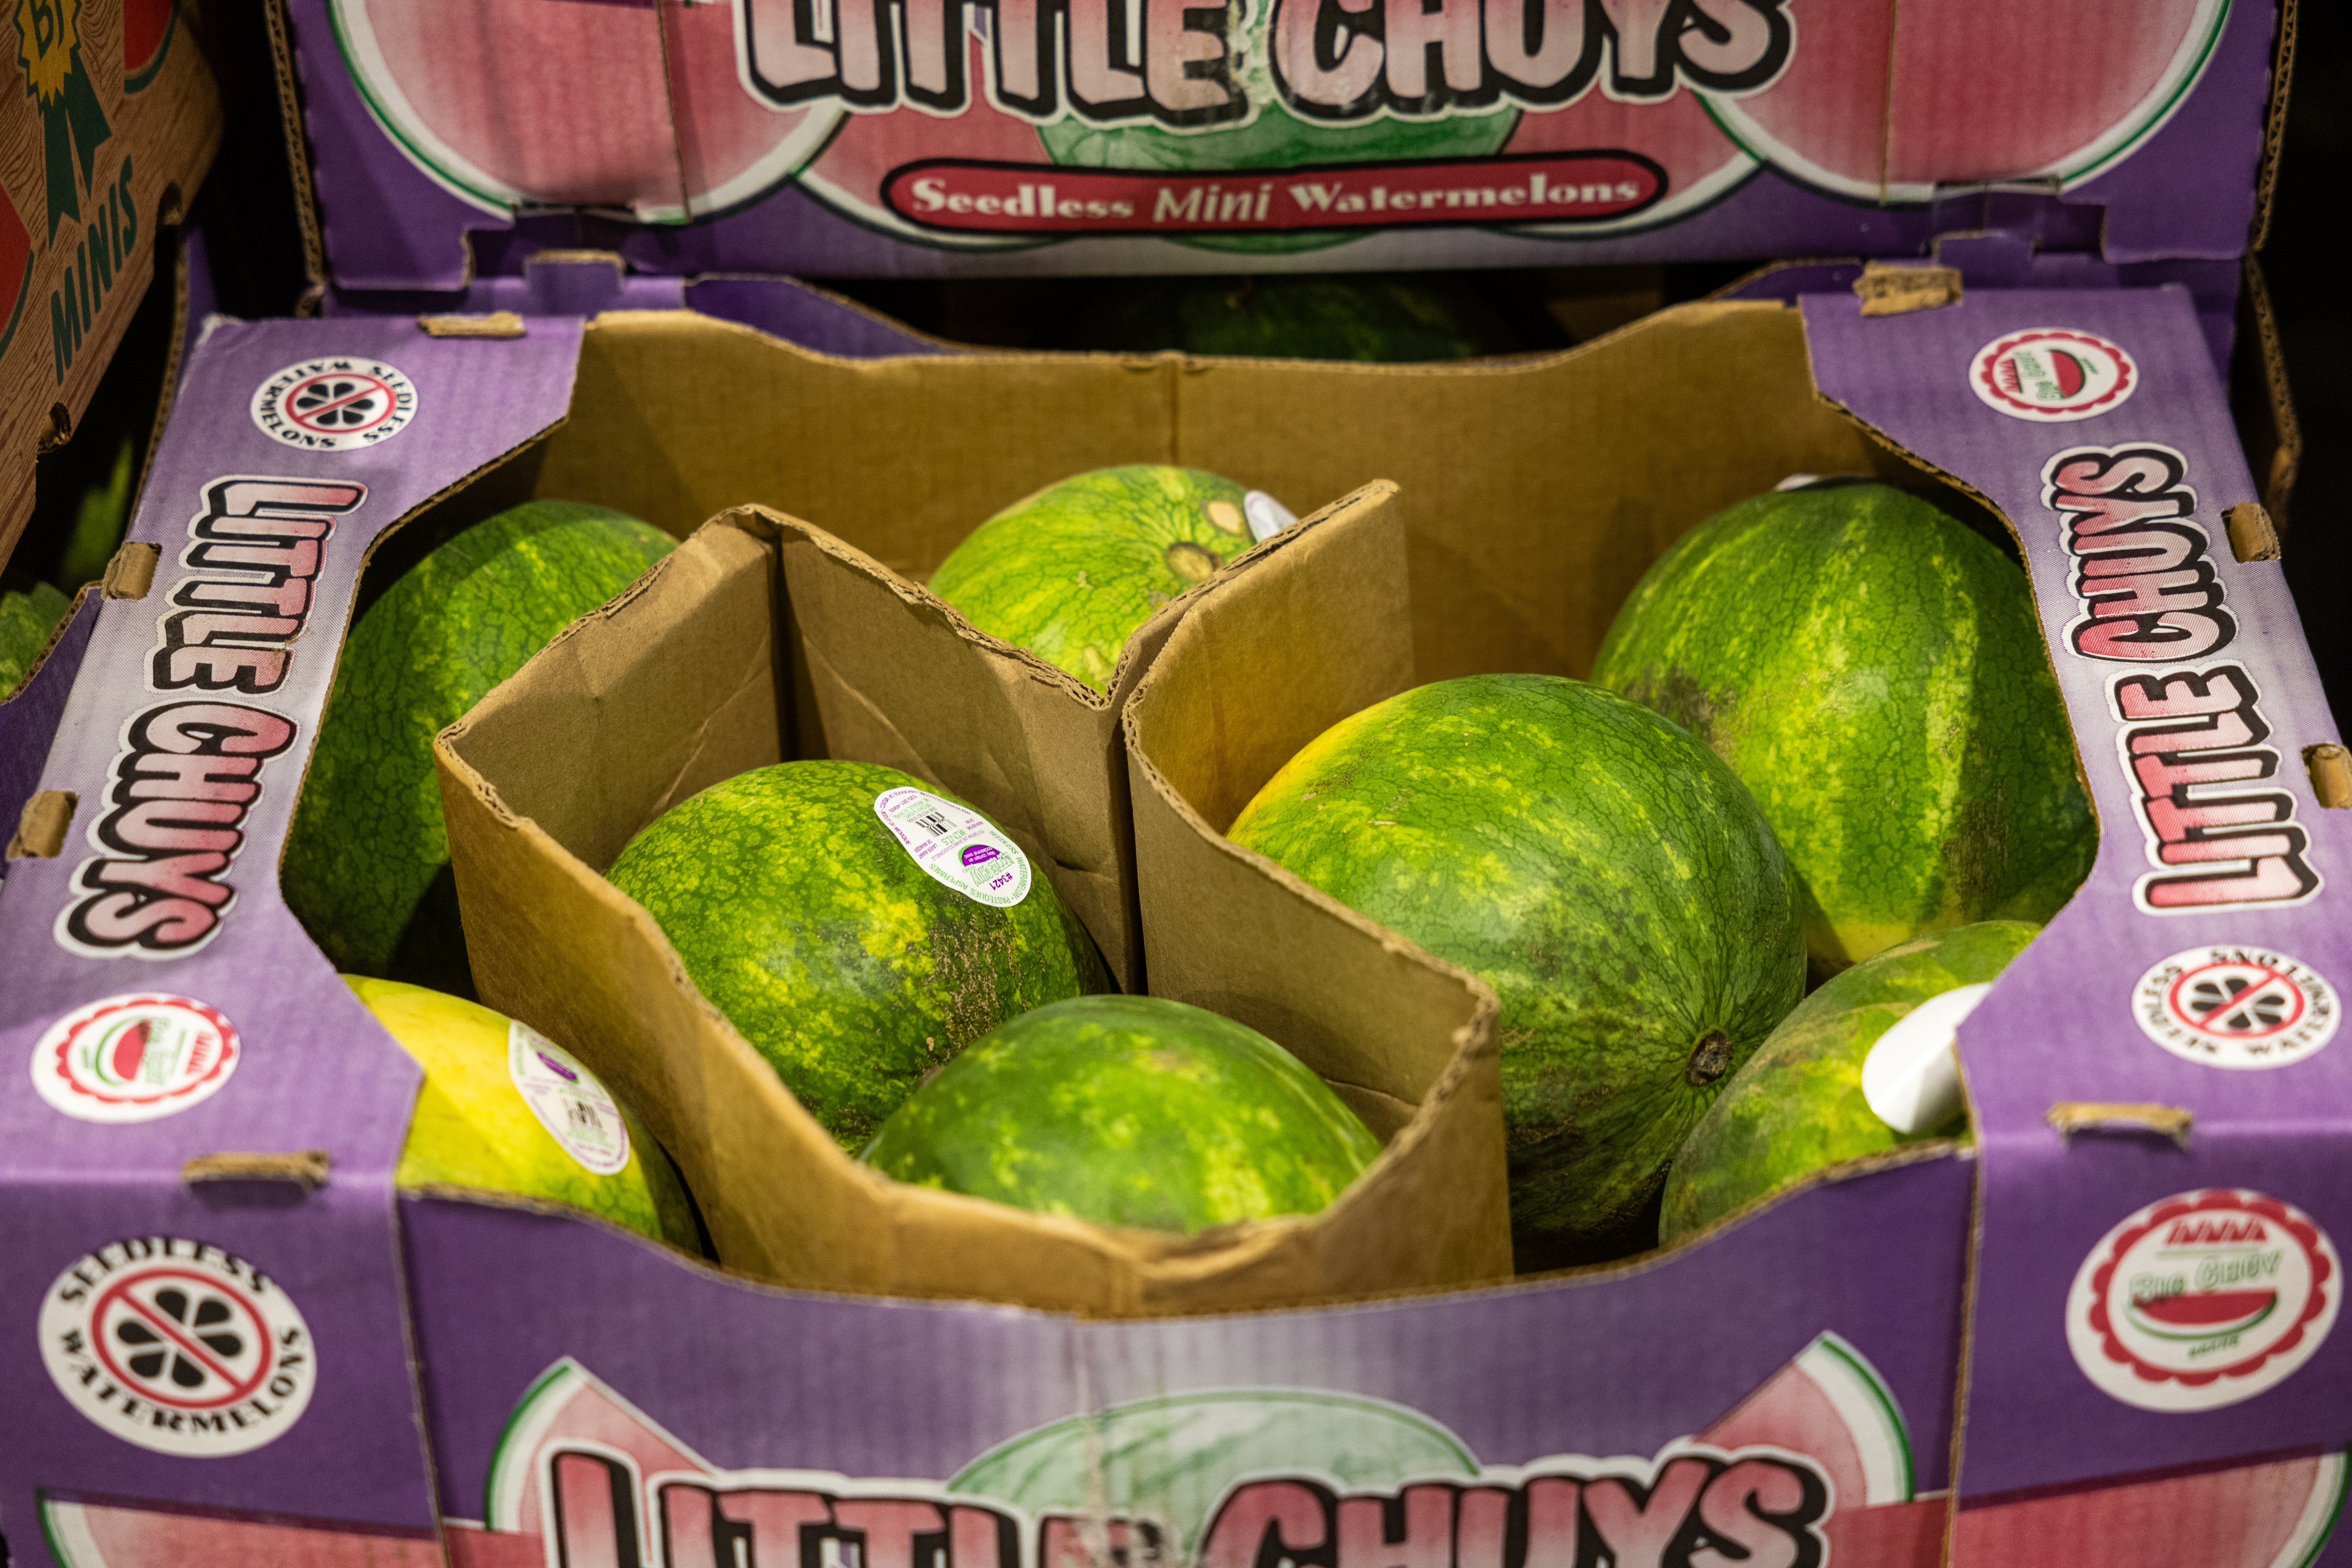 A crate of mini watermelons from Little Chuys